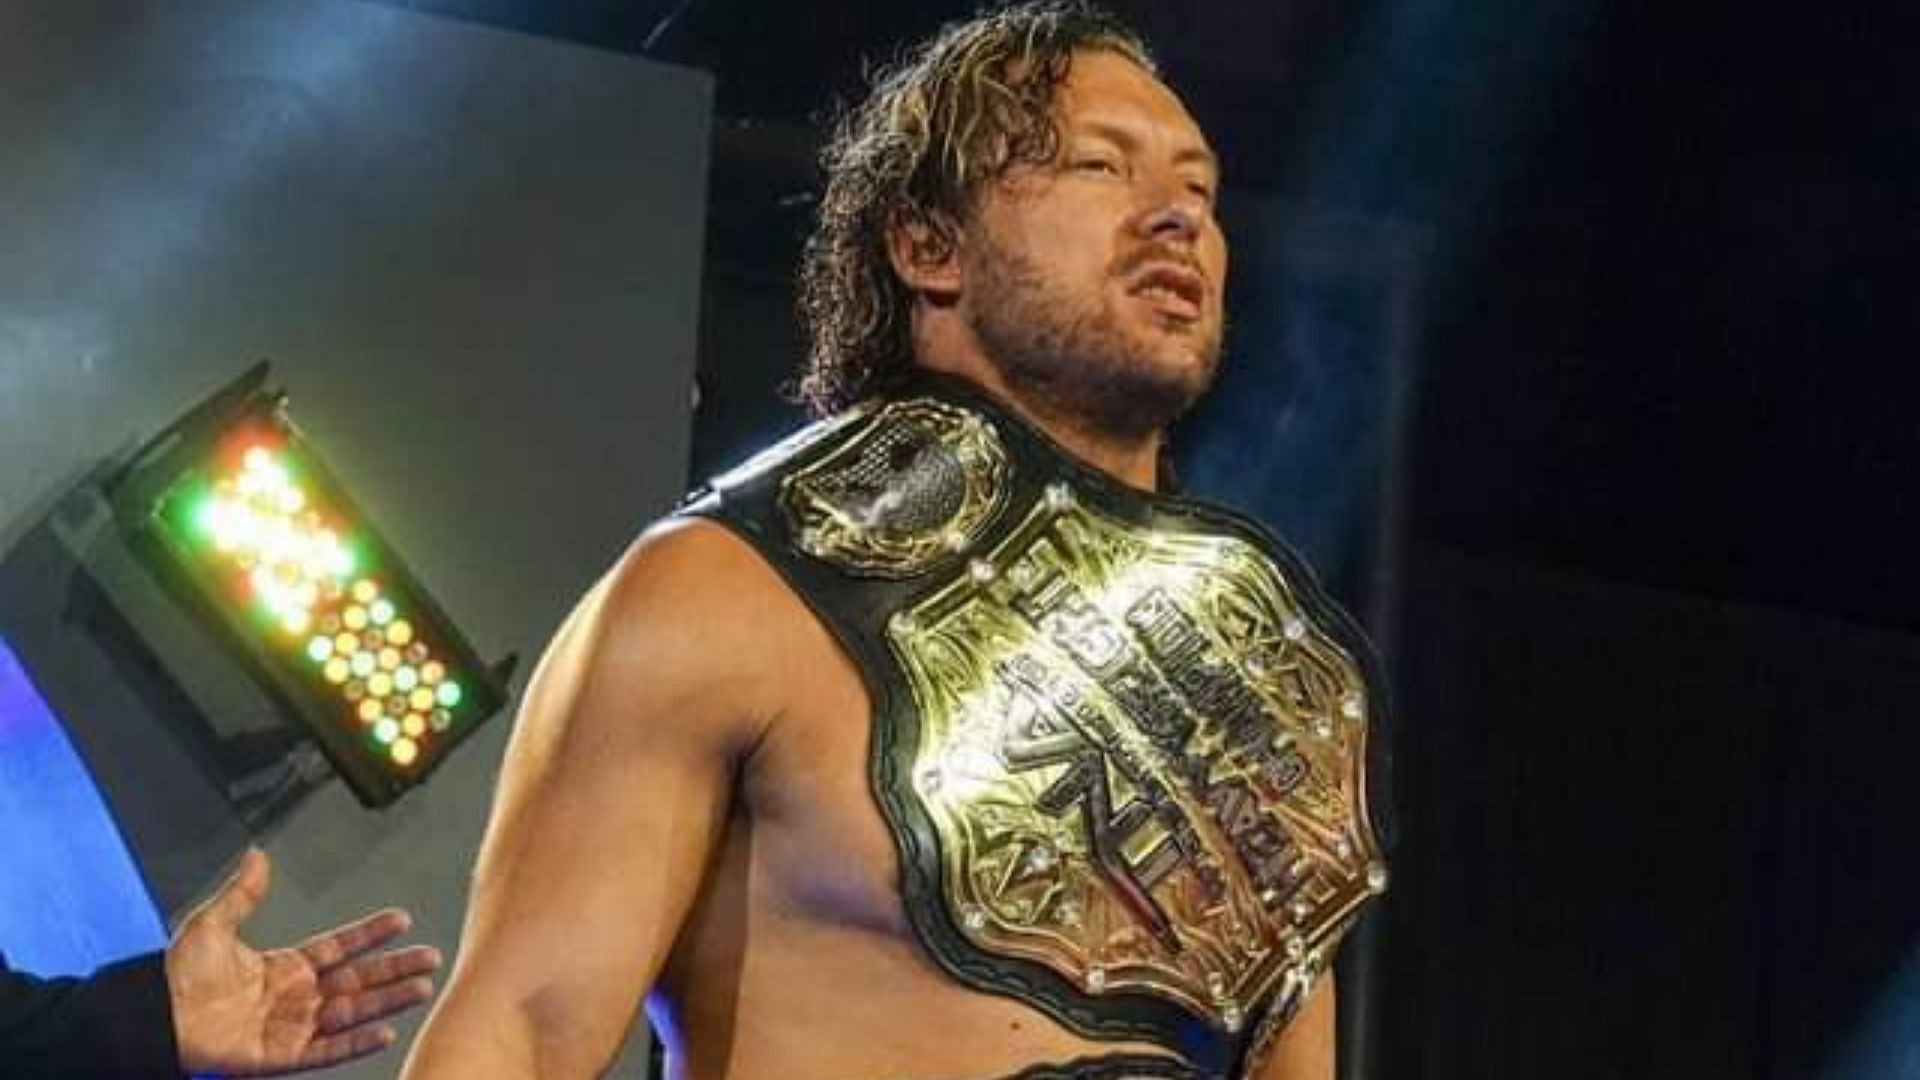 Kenny Omega at AEW Double or Nothing 2021!